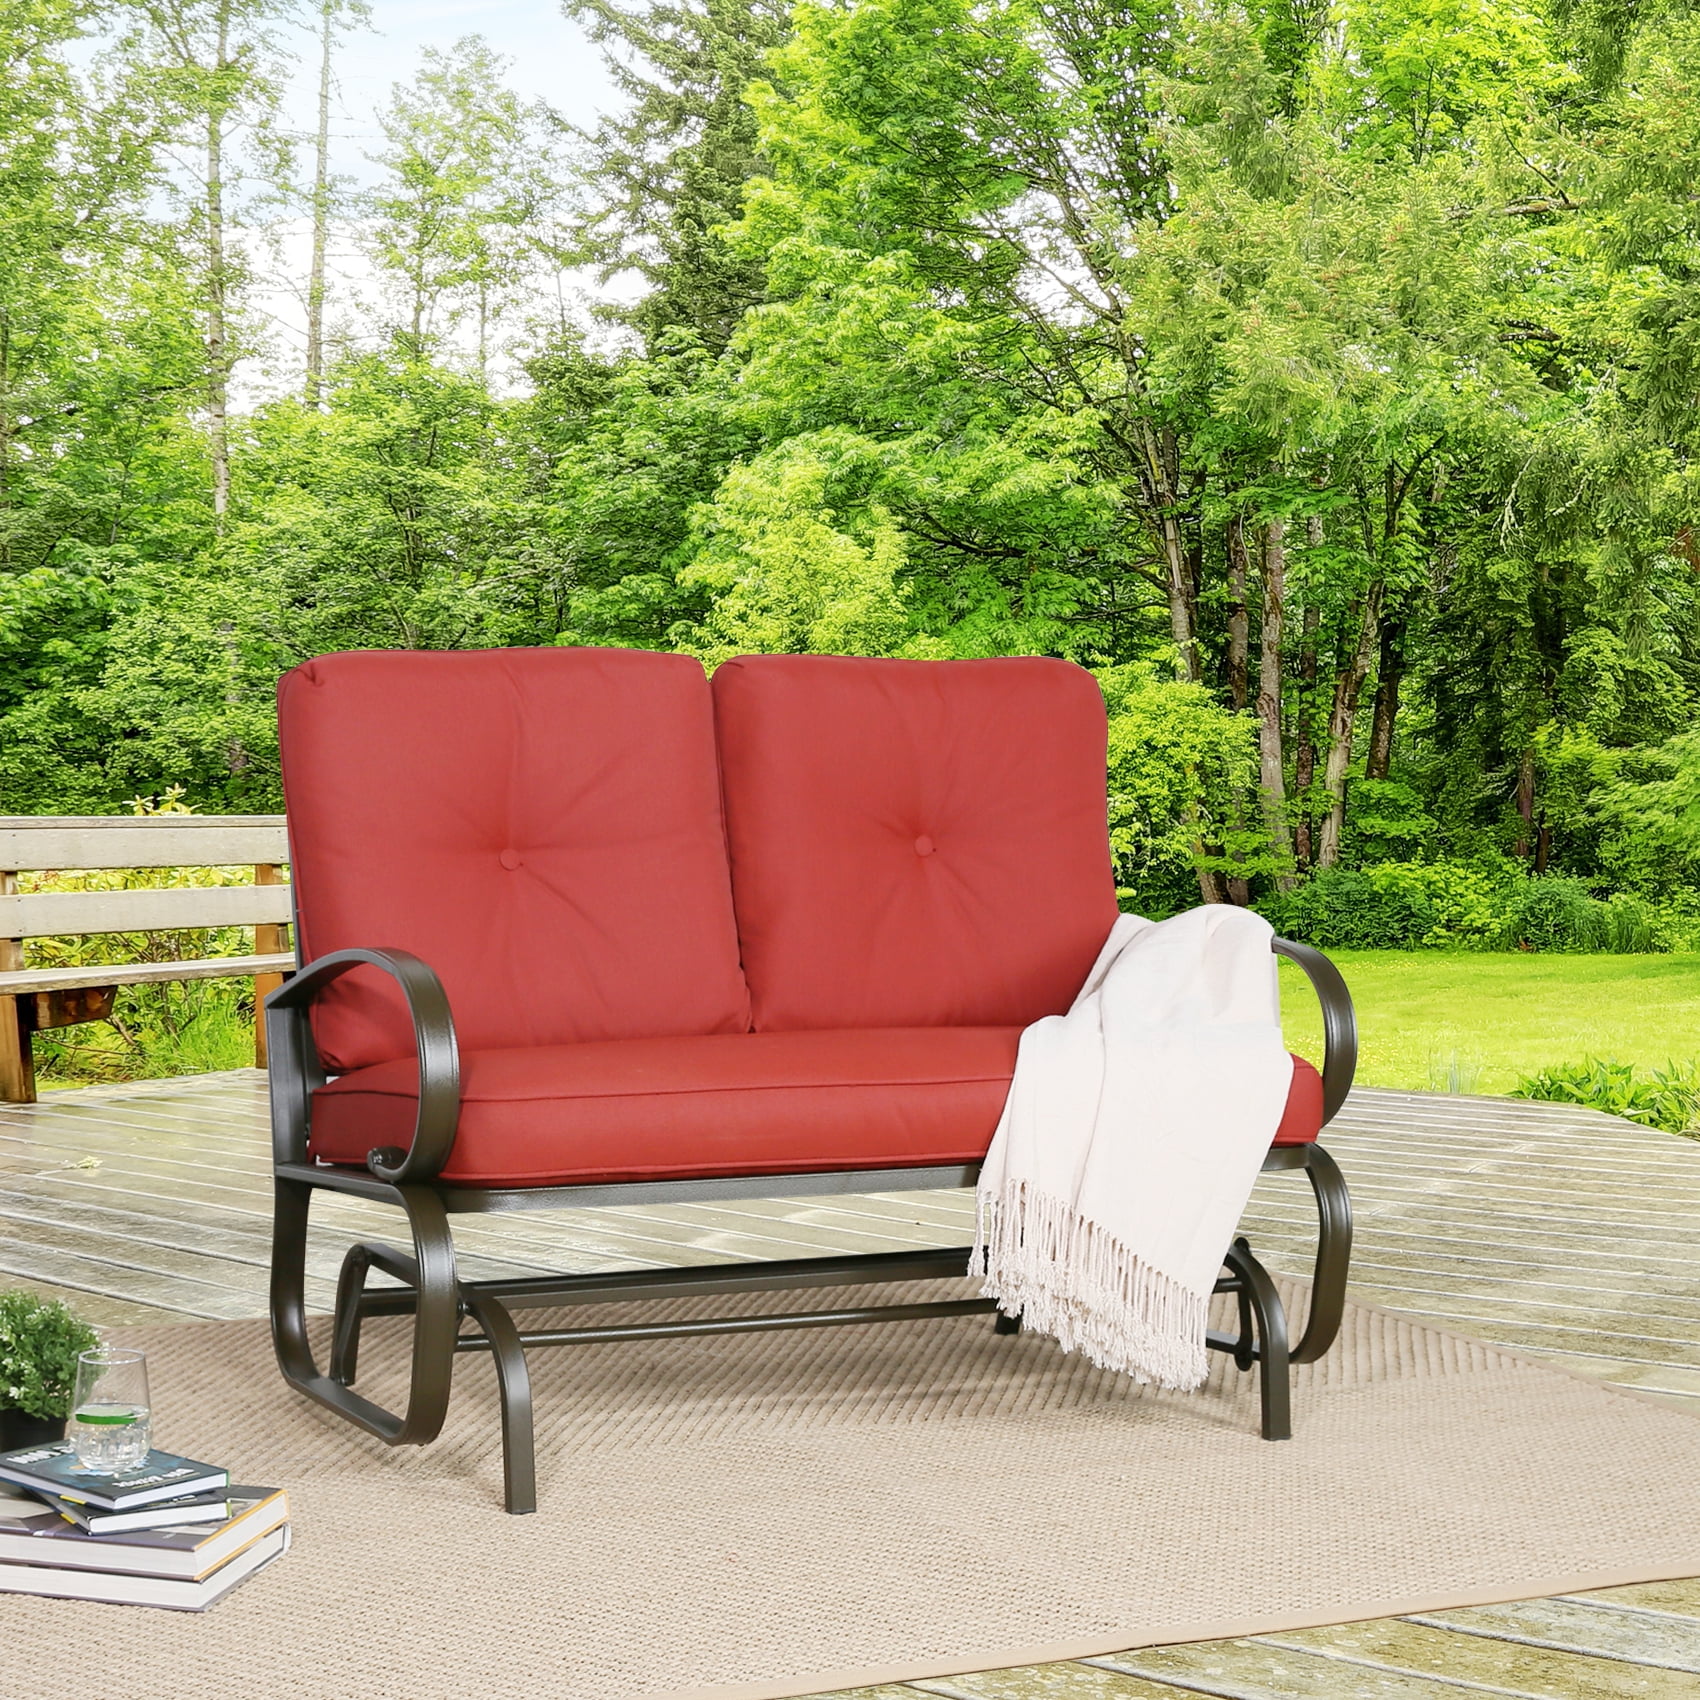 Loveseat Glider Bench 2 Seat Red Steel Frame Finish Outdoor Patio Furniture 